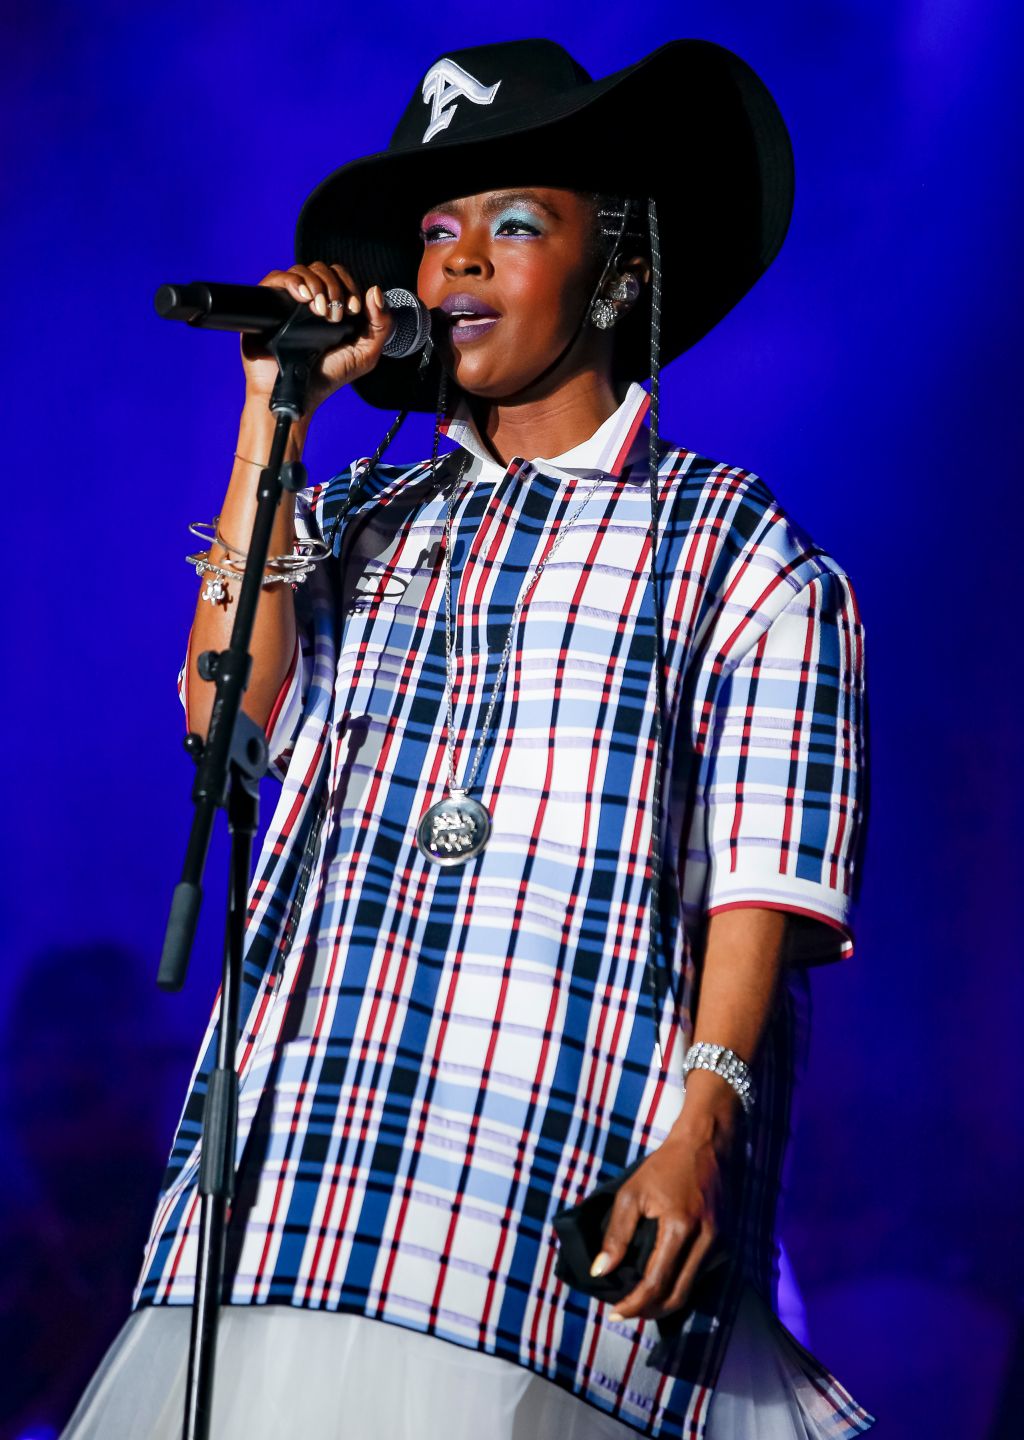 Lauryn Hill Performs at 2018 Pitchfork Music Festival - Day 3